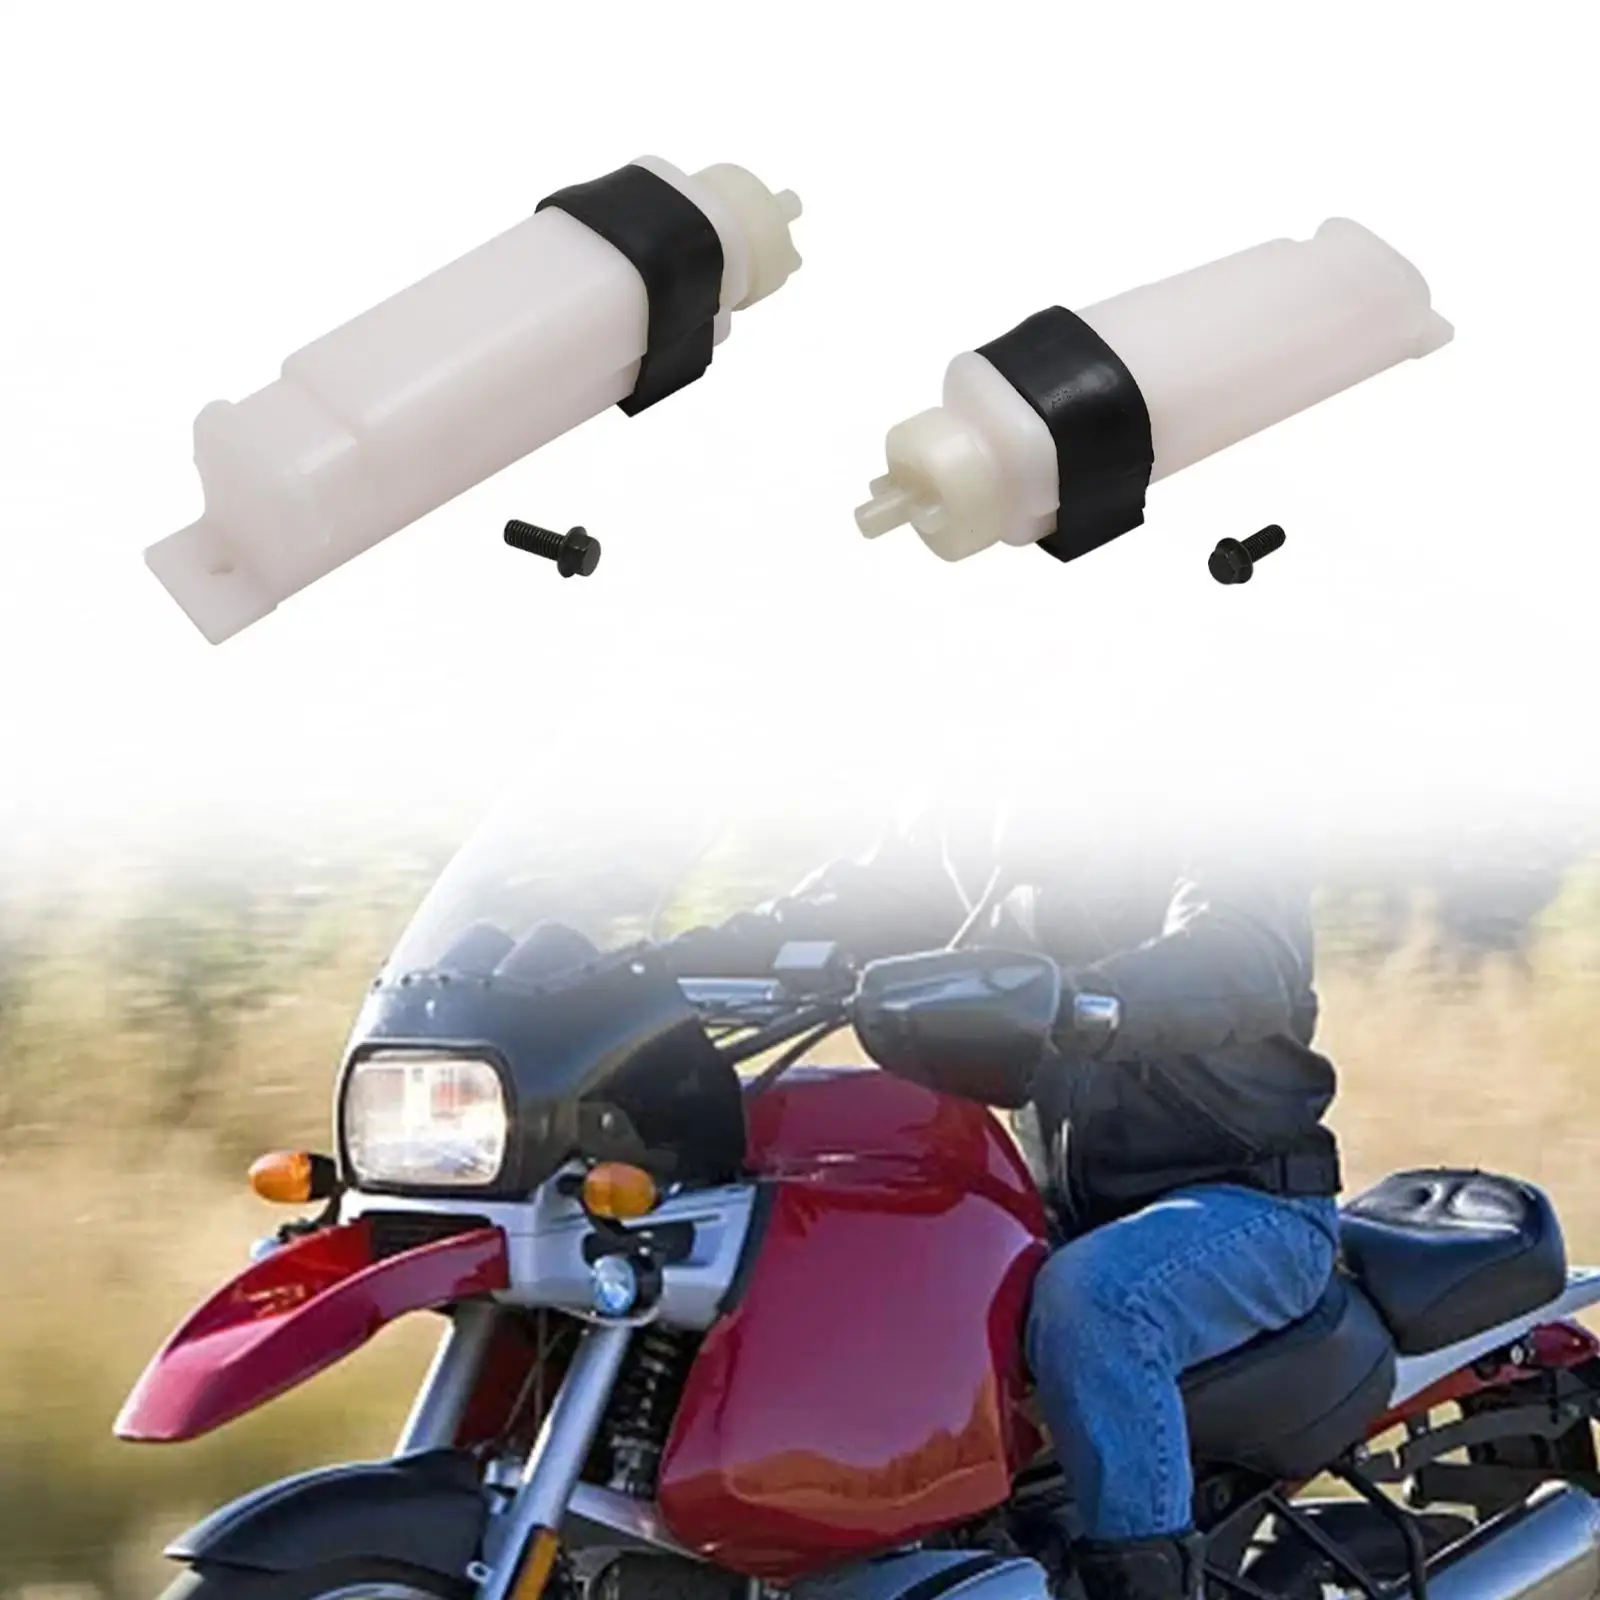 Cooling Water Tank 150 200 250cc ABS Overflow Bottle High Performance Premium Durable for Loncin Motorcycle Lifan Zongshen